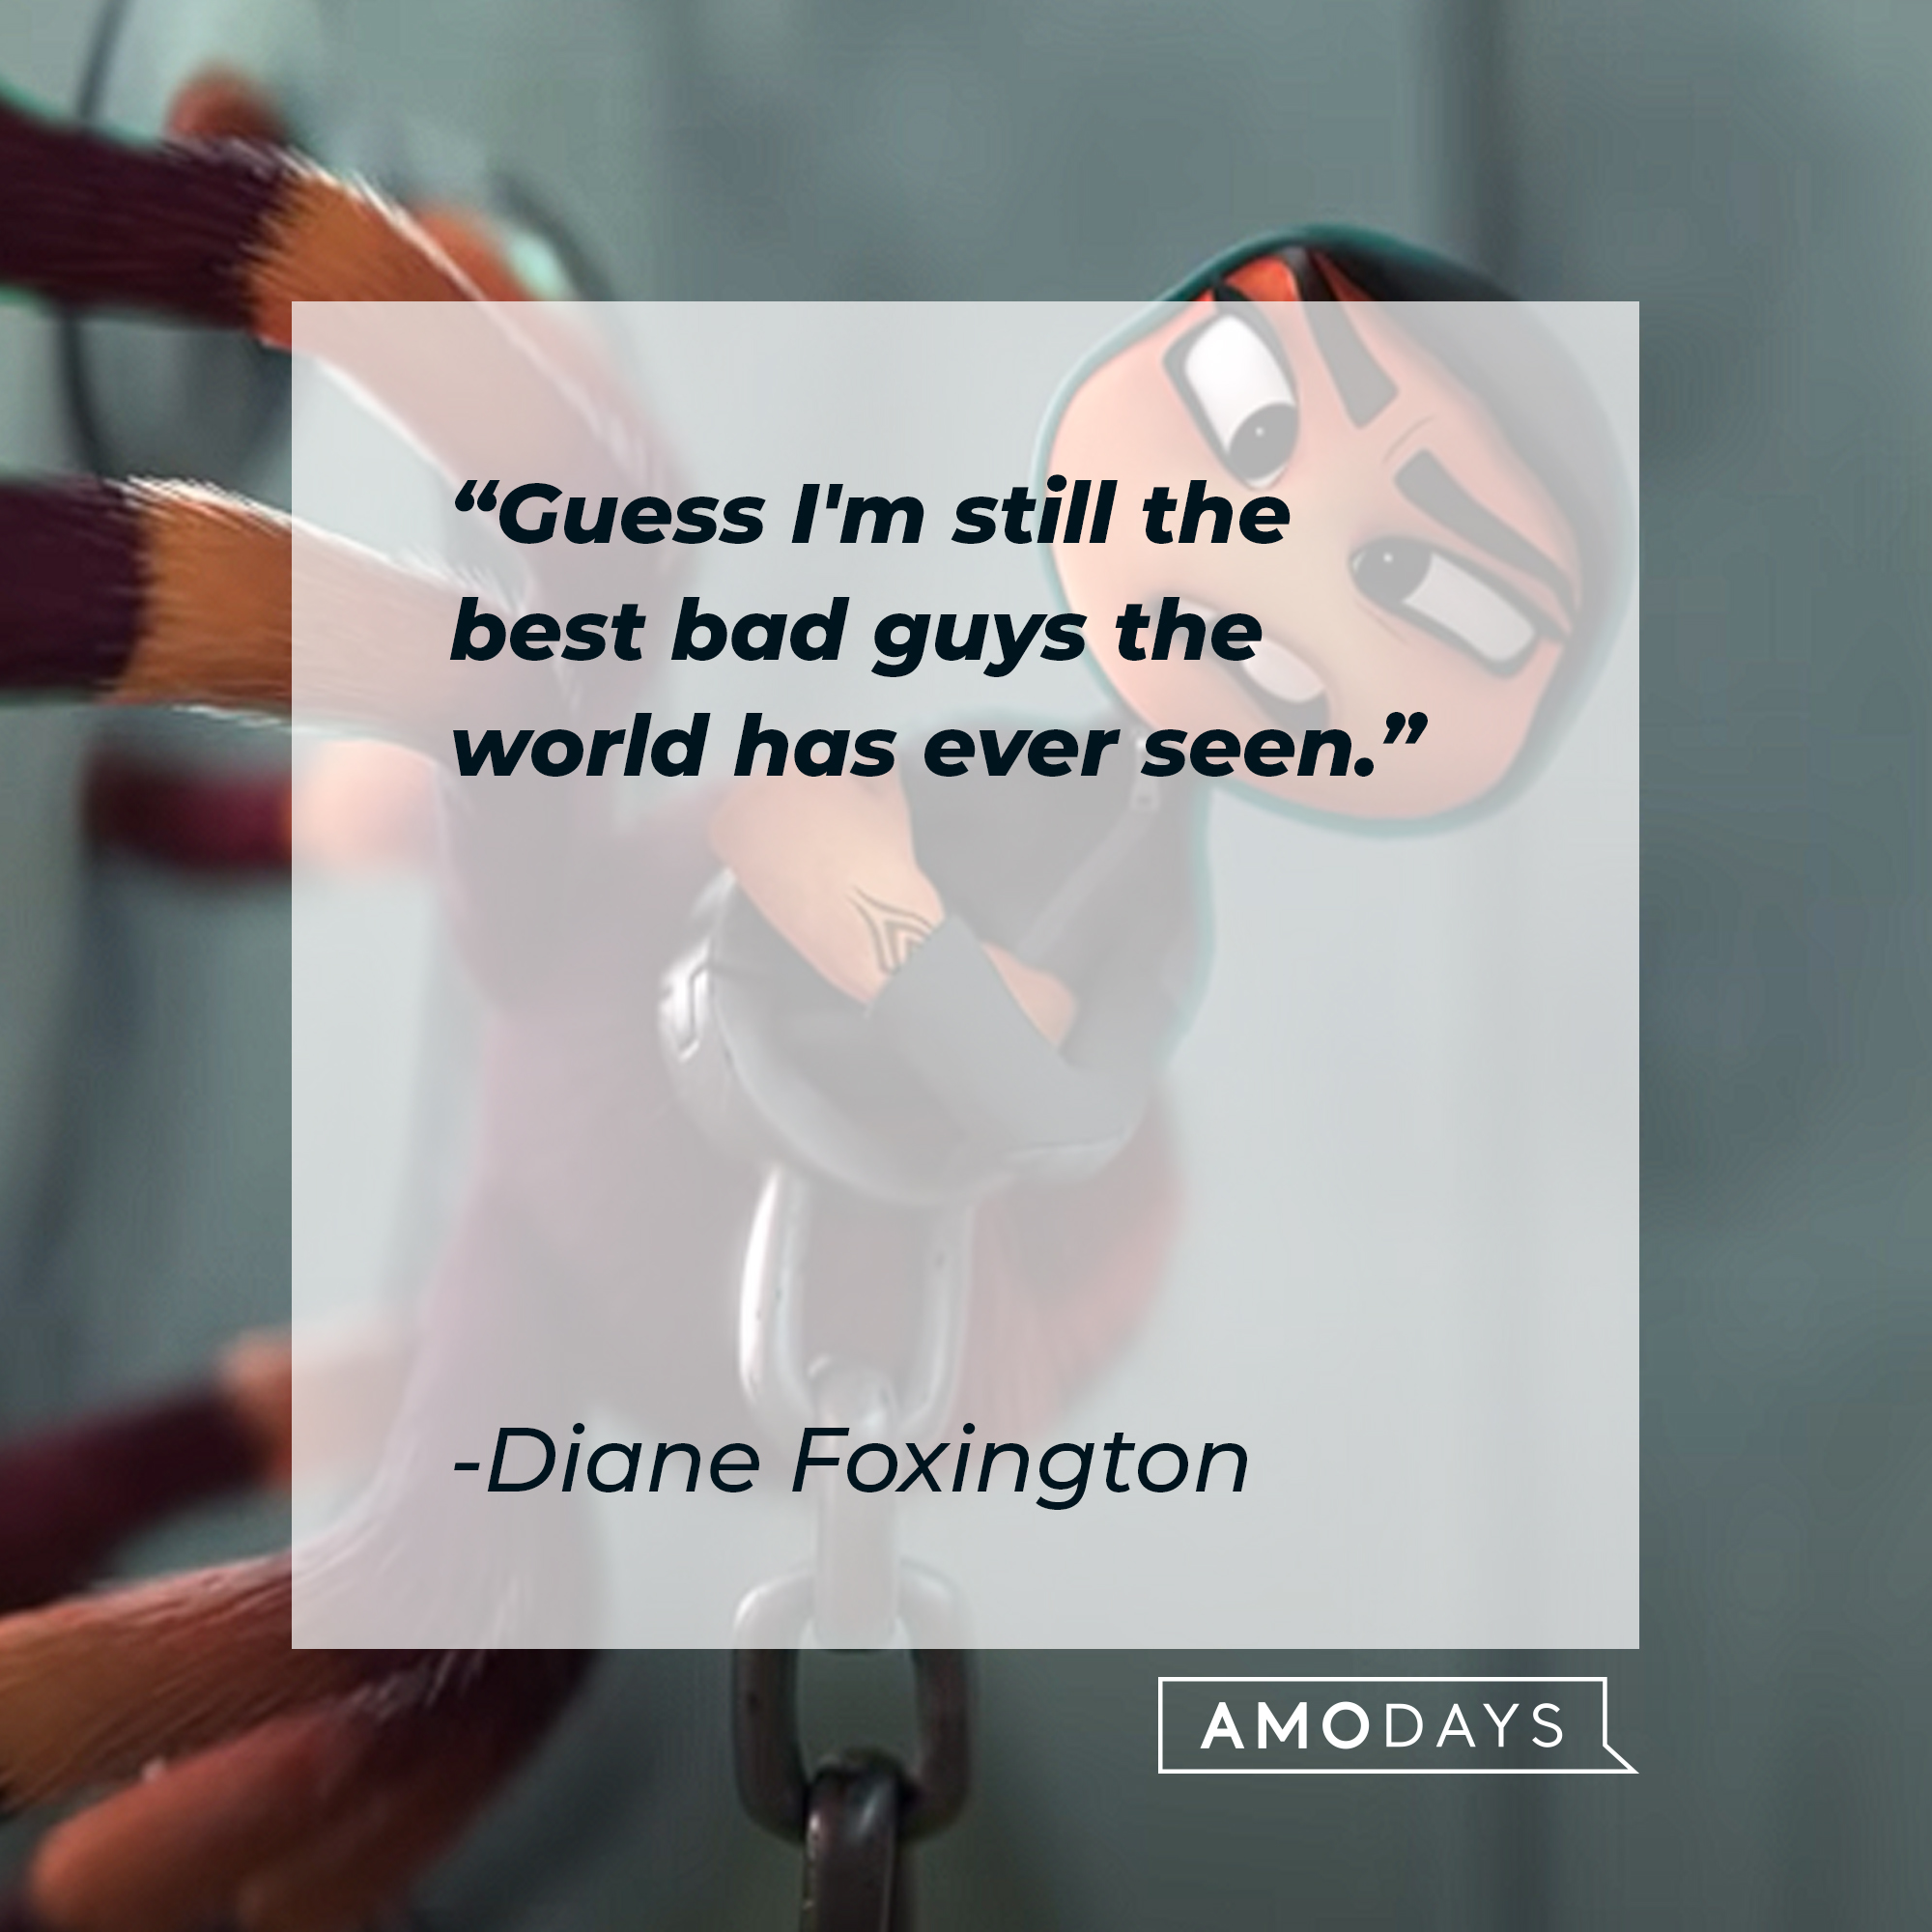 Diane Foxington's quote: "Guess I'm still the best bad guys the world has ever seen." | Source: youtube.com/UniversalPictures